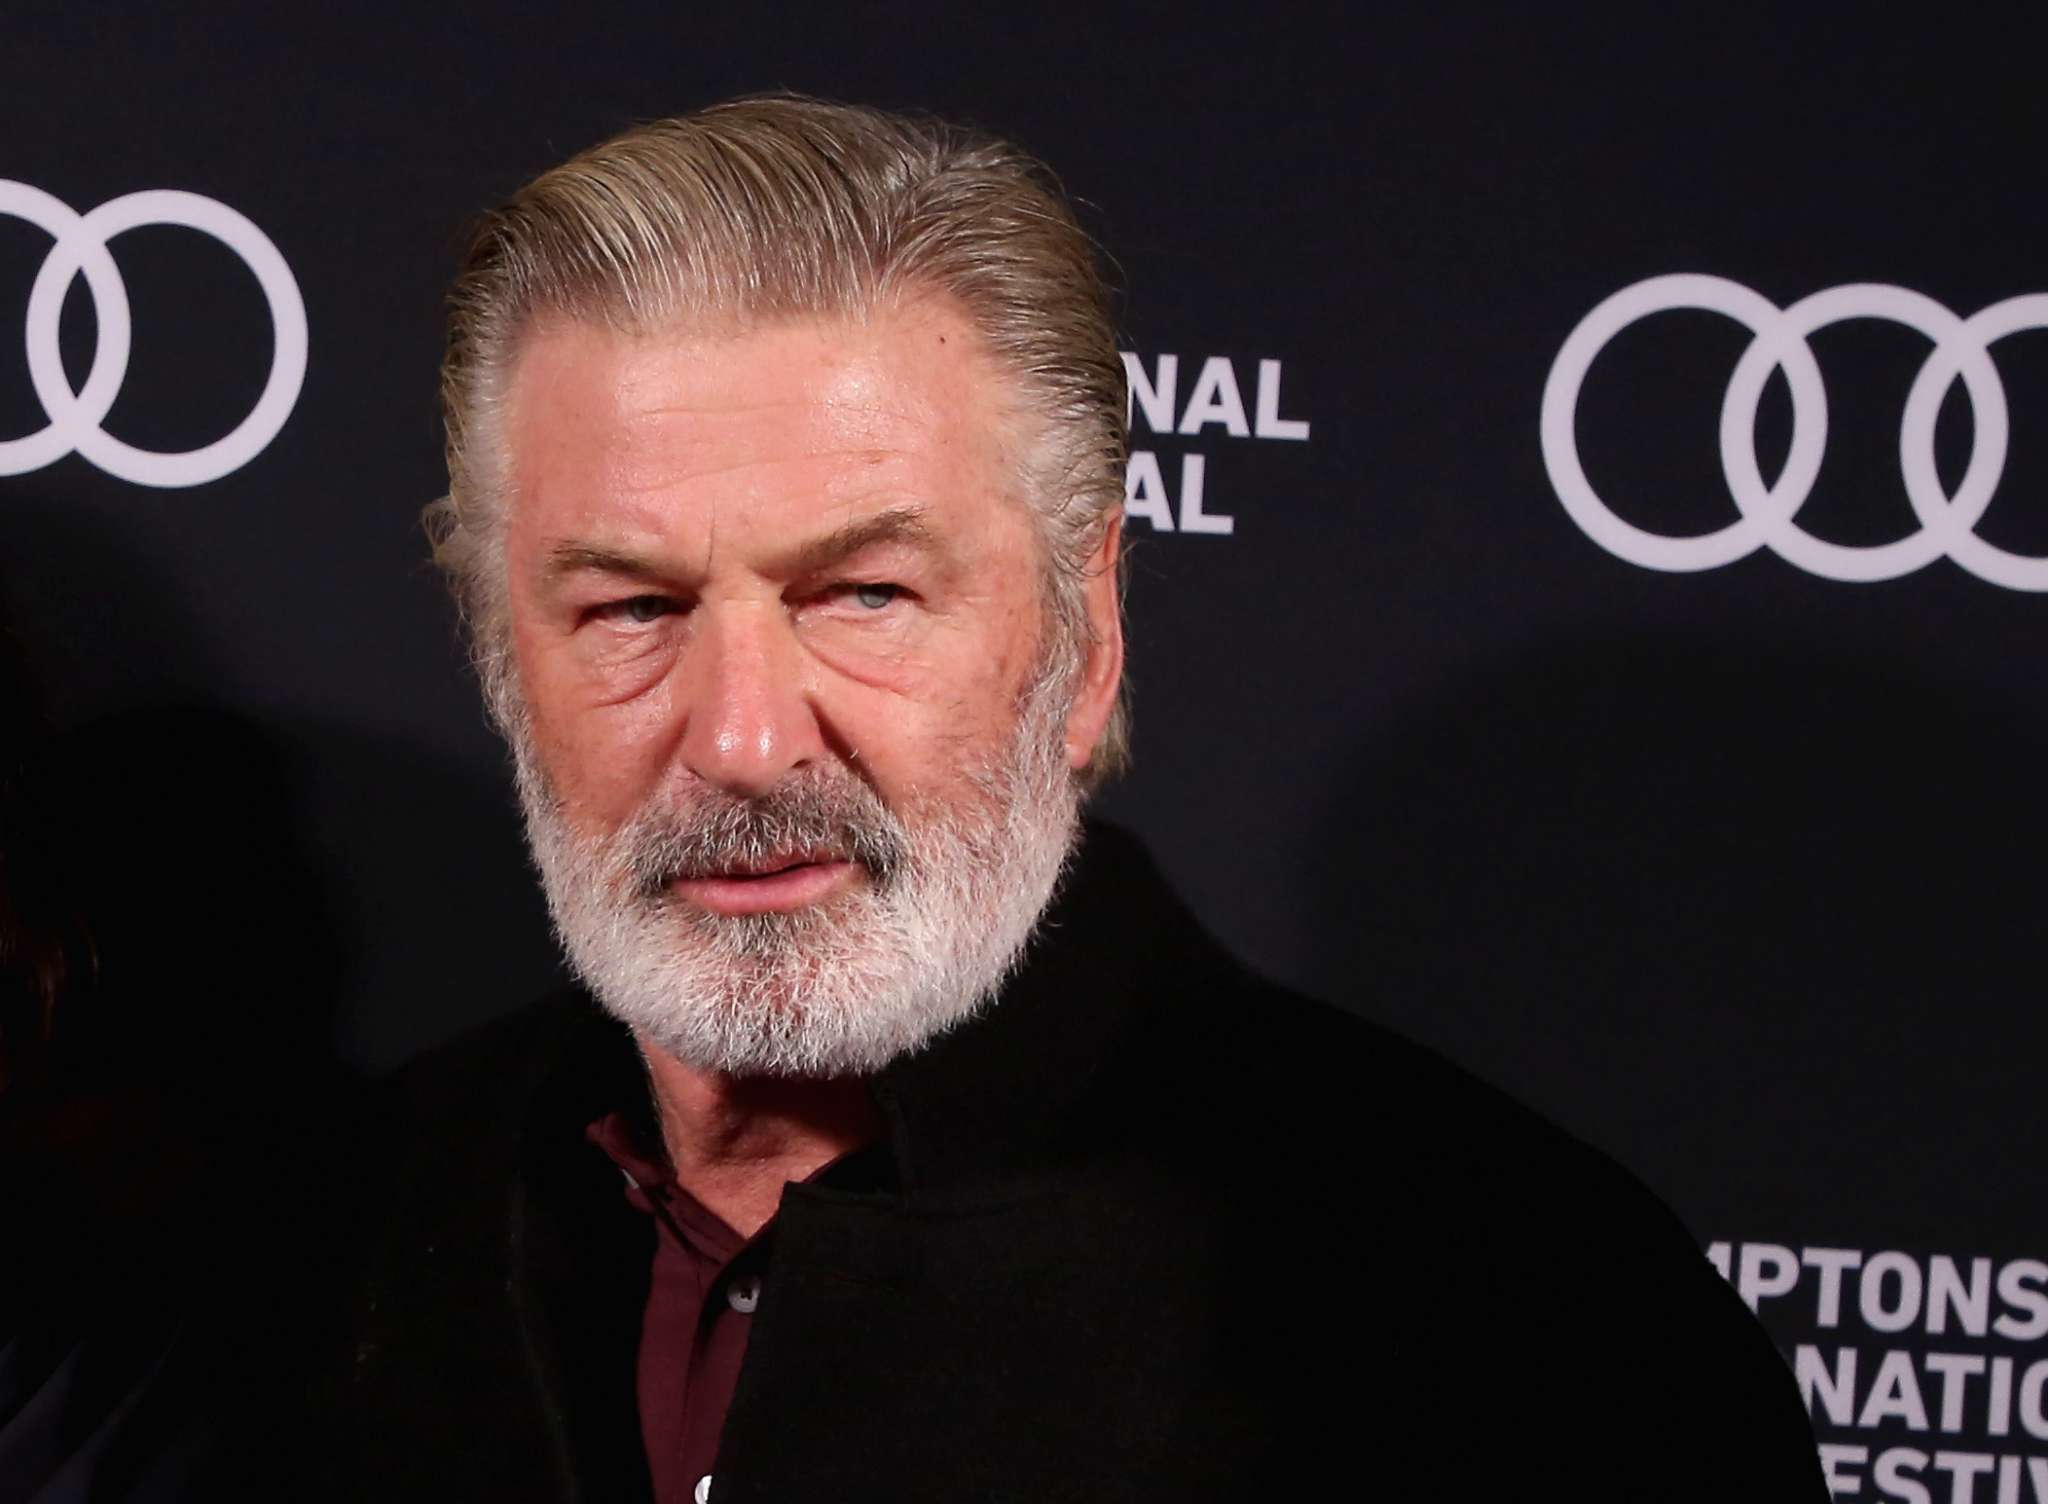 alec-baldwin-continues-addressing-emotional-messages-about-the-recent-tragedy